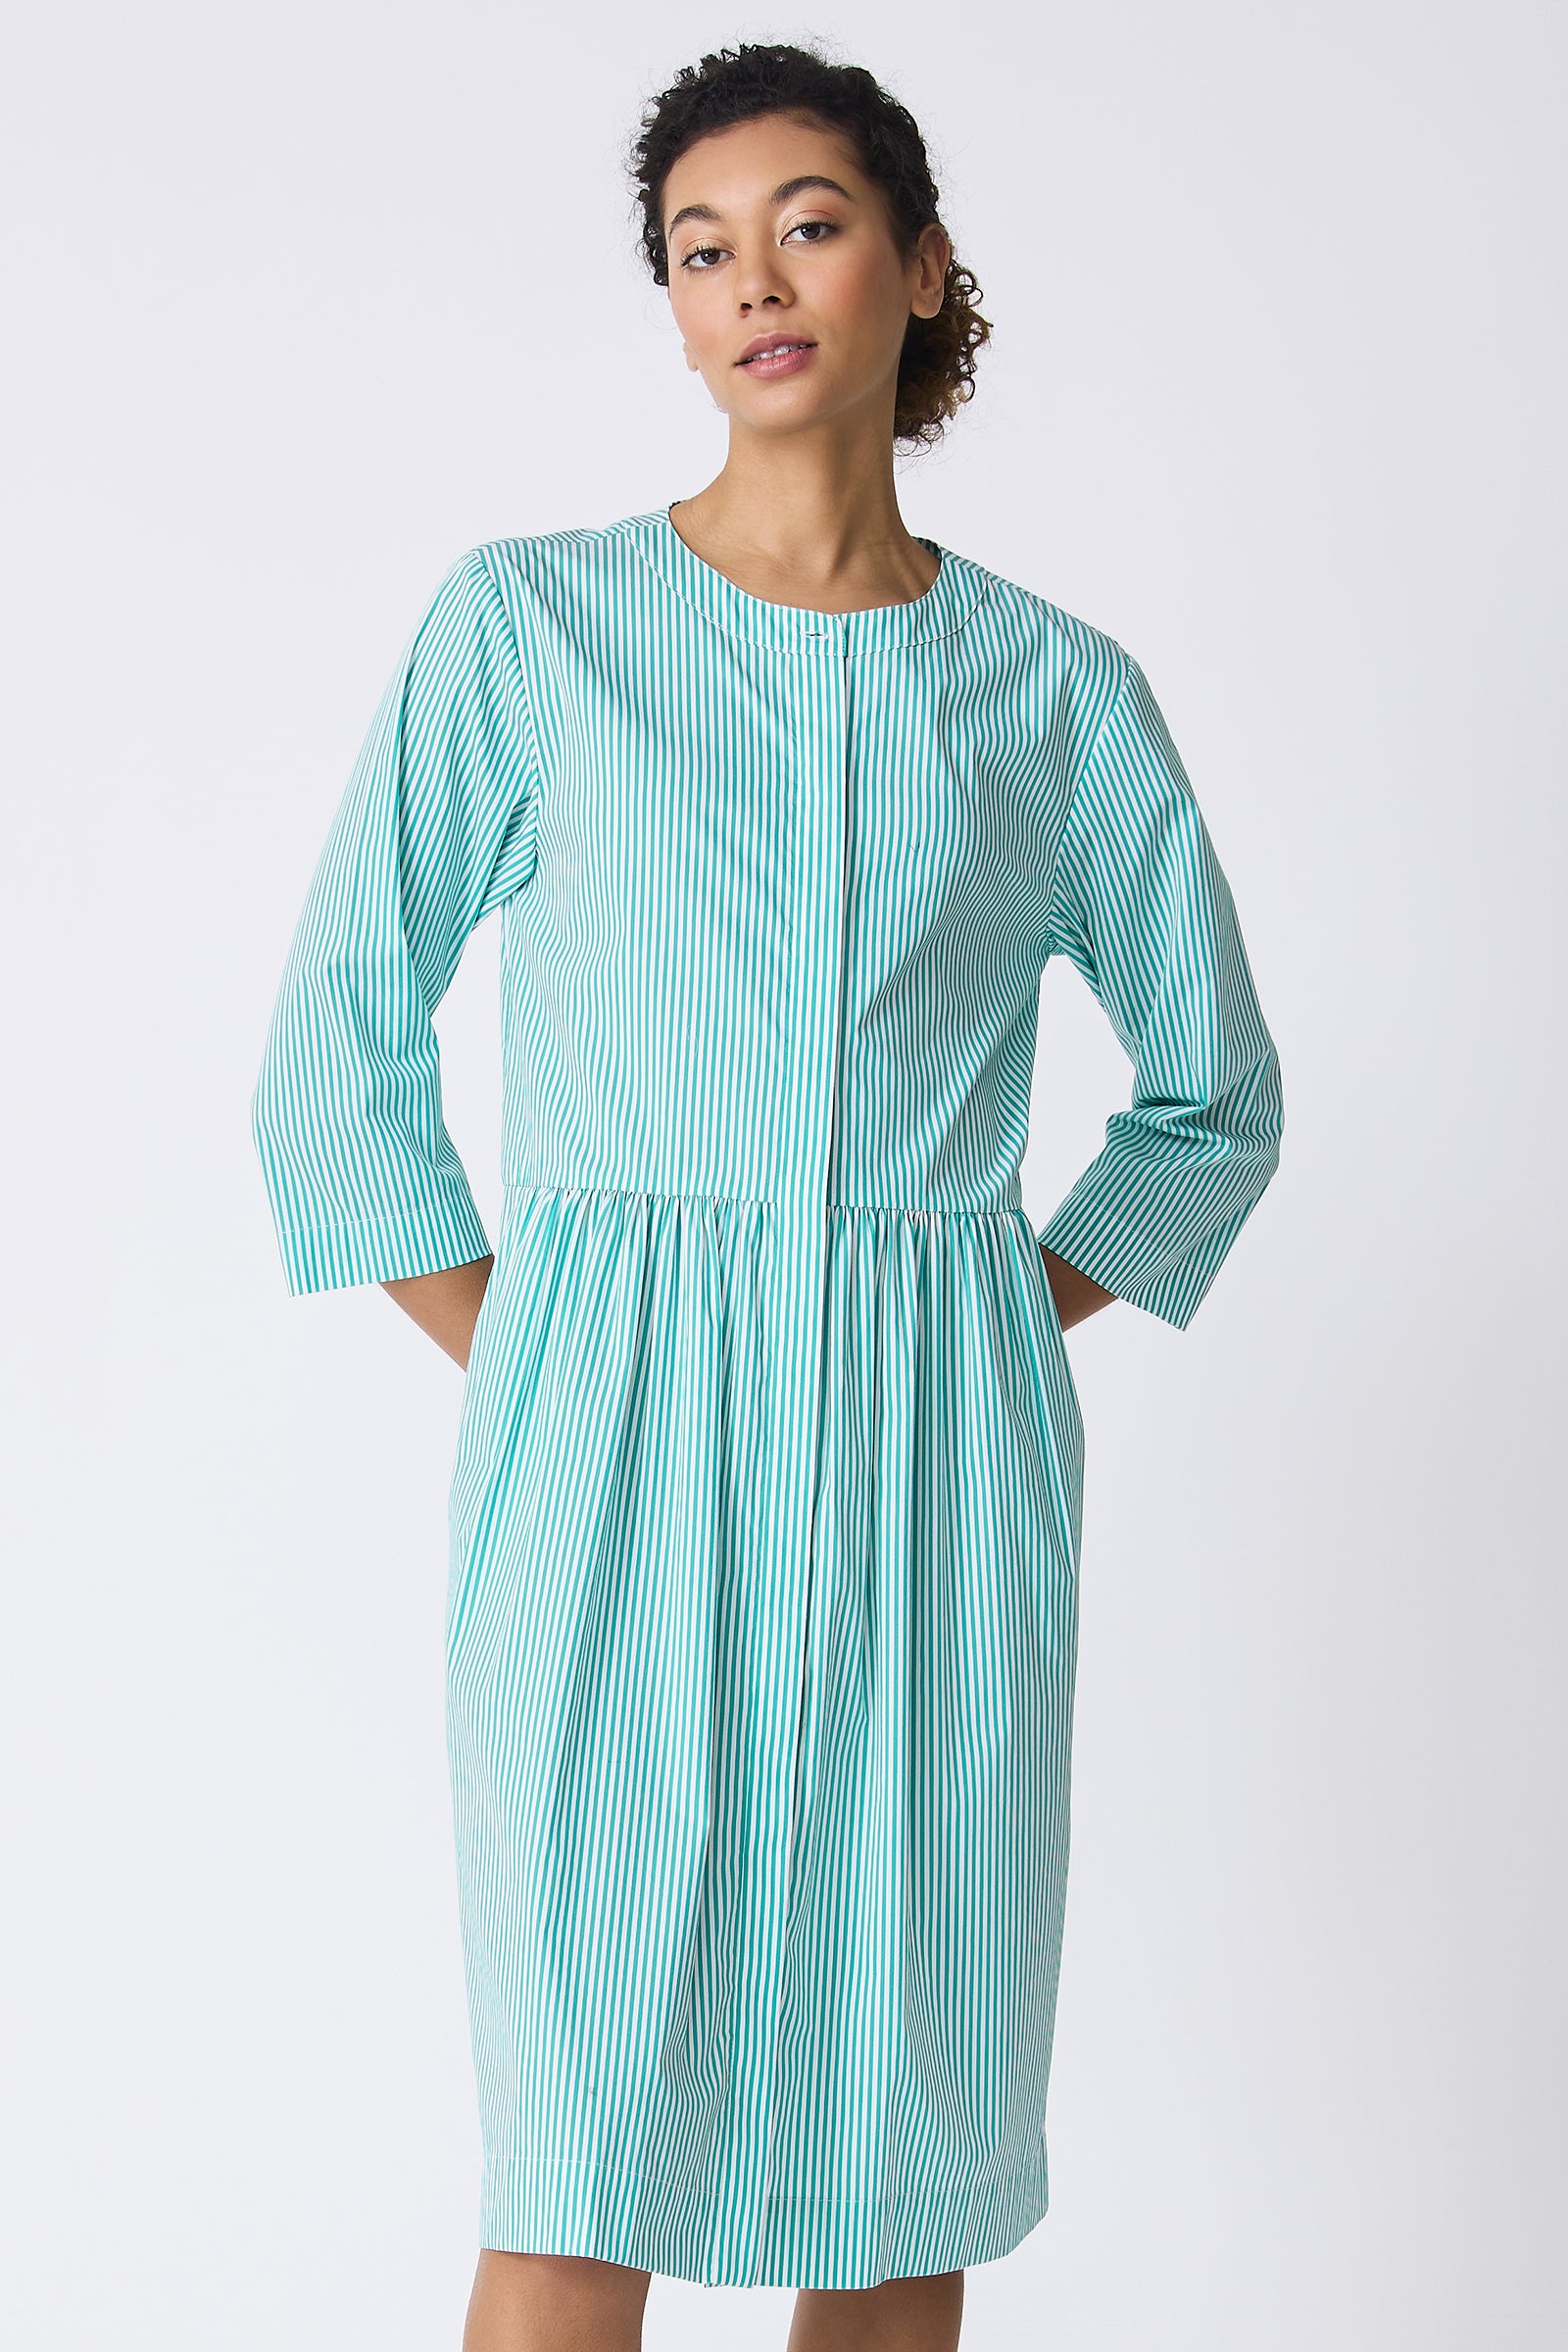 Kal Rieman Abby Shirt Dress in Miami Stripe Green on model with hands behind back front view